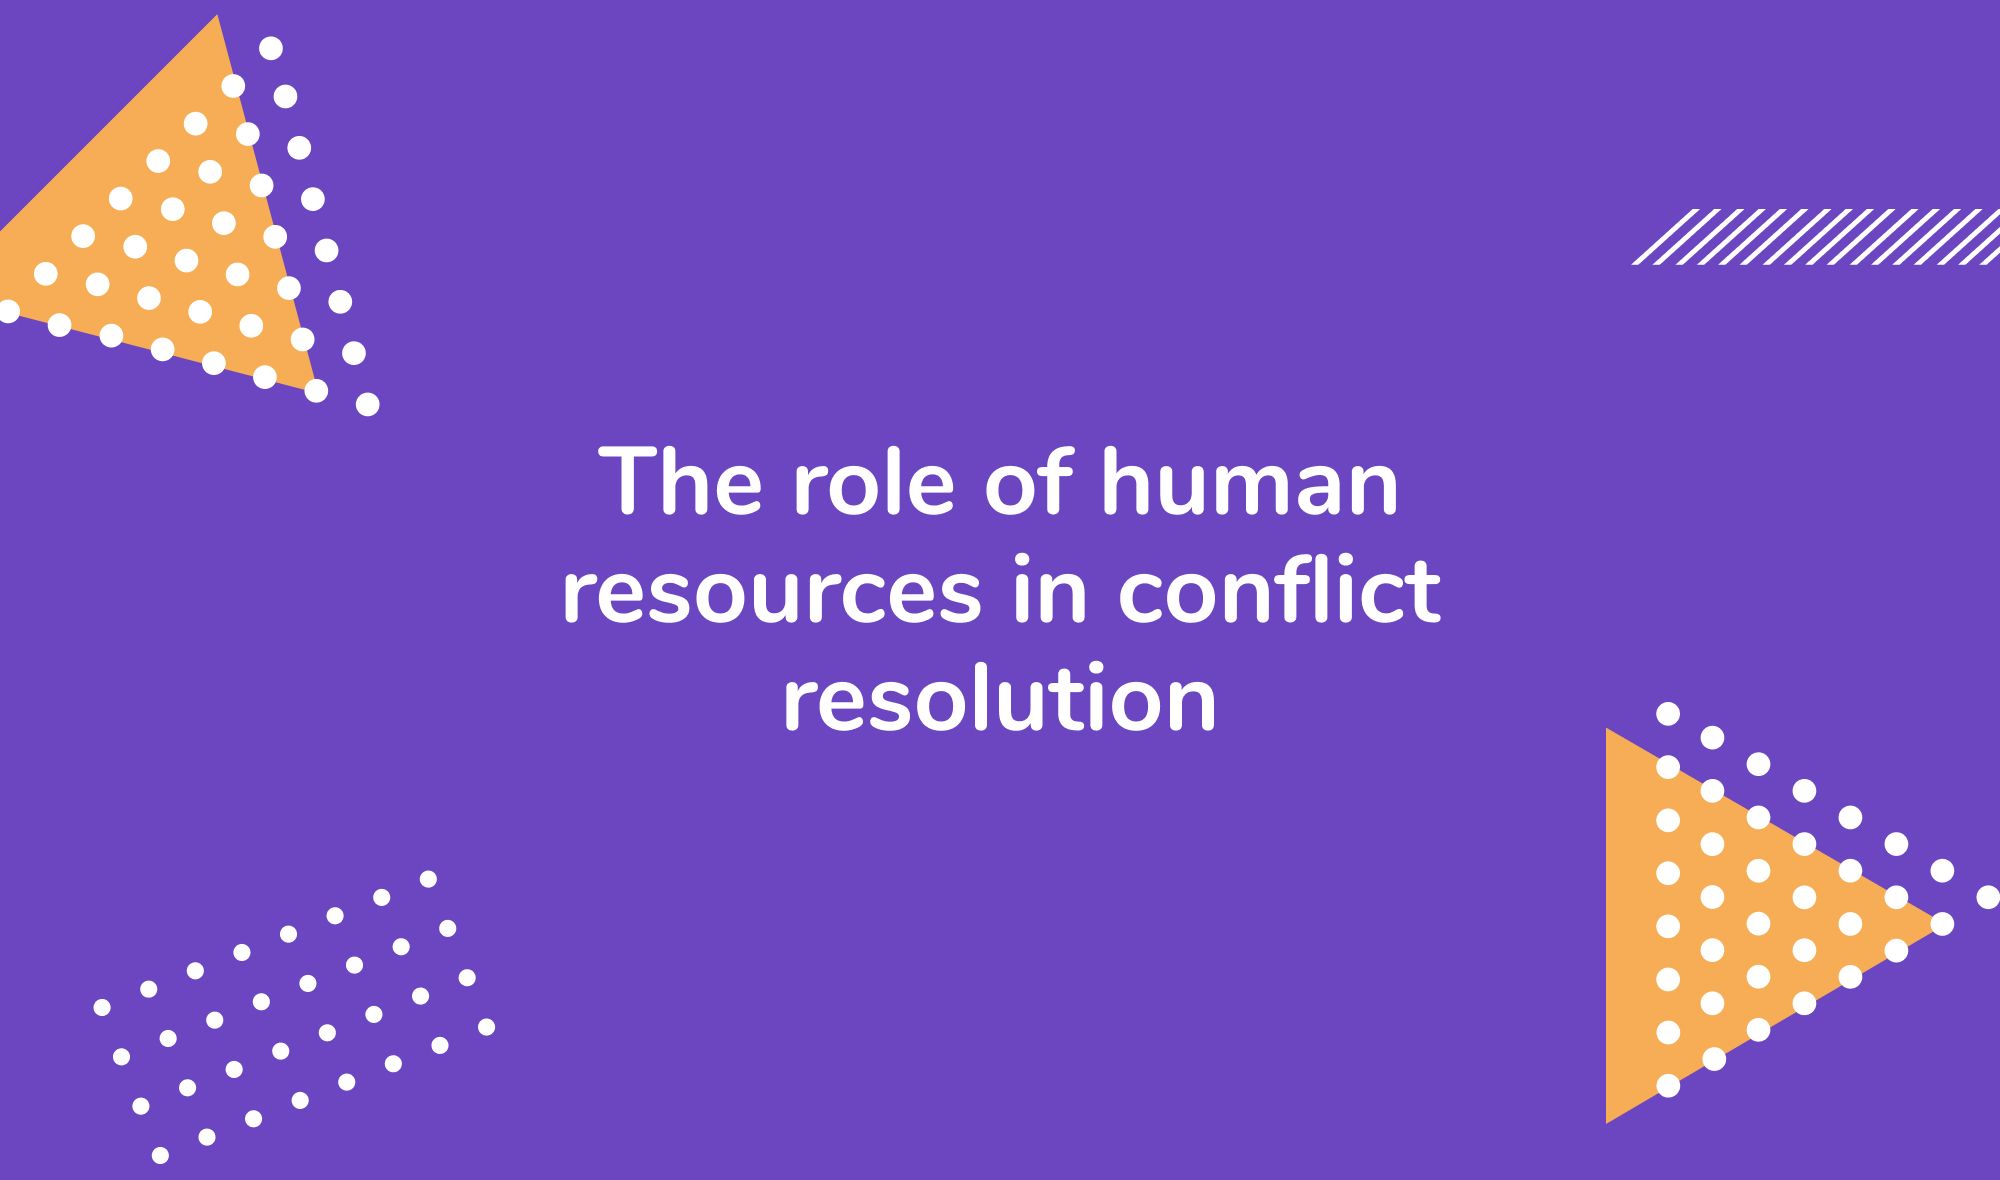 The role of human resources in conflict resolution